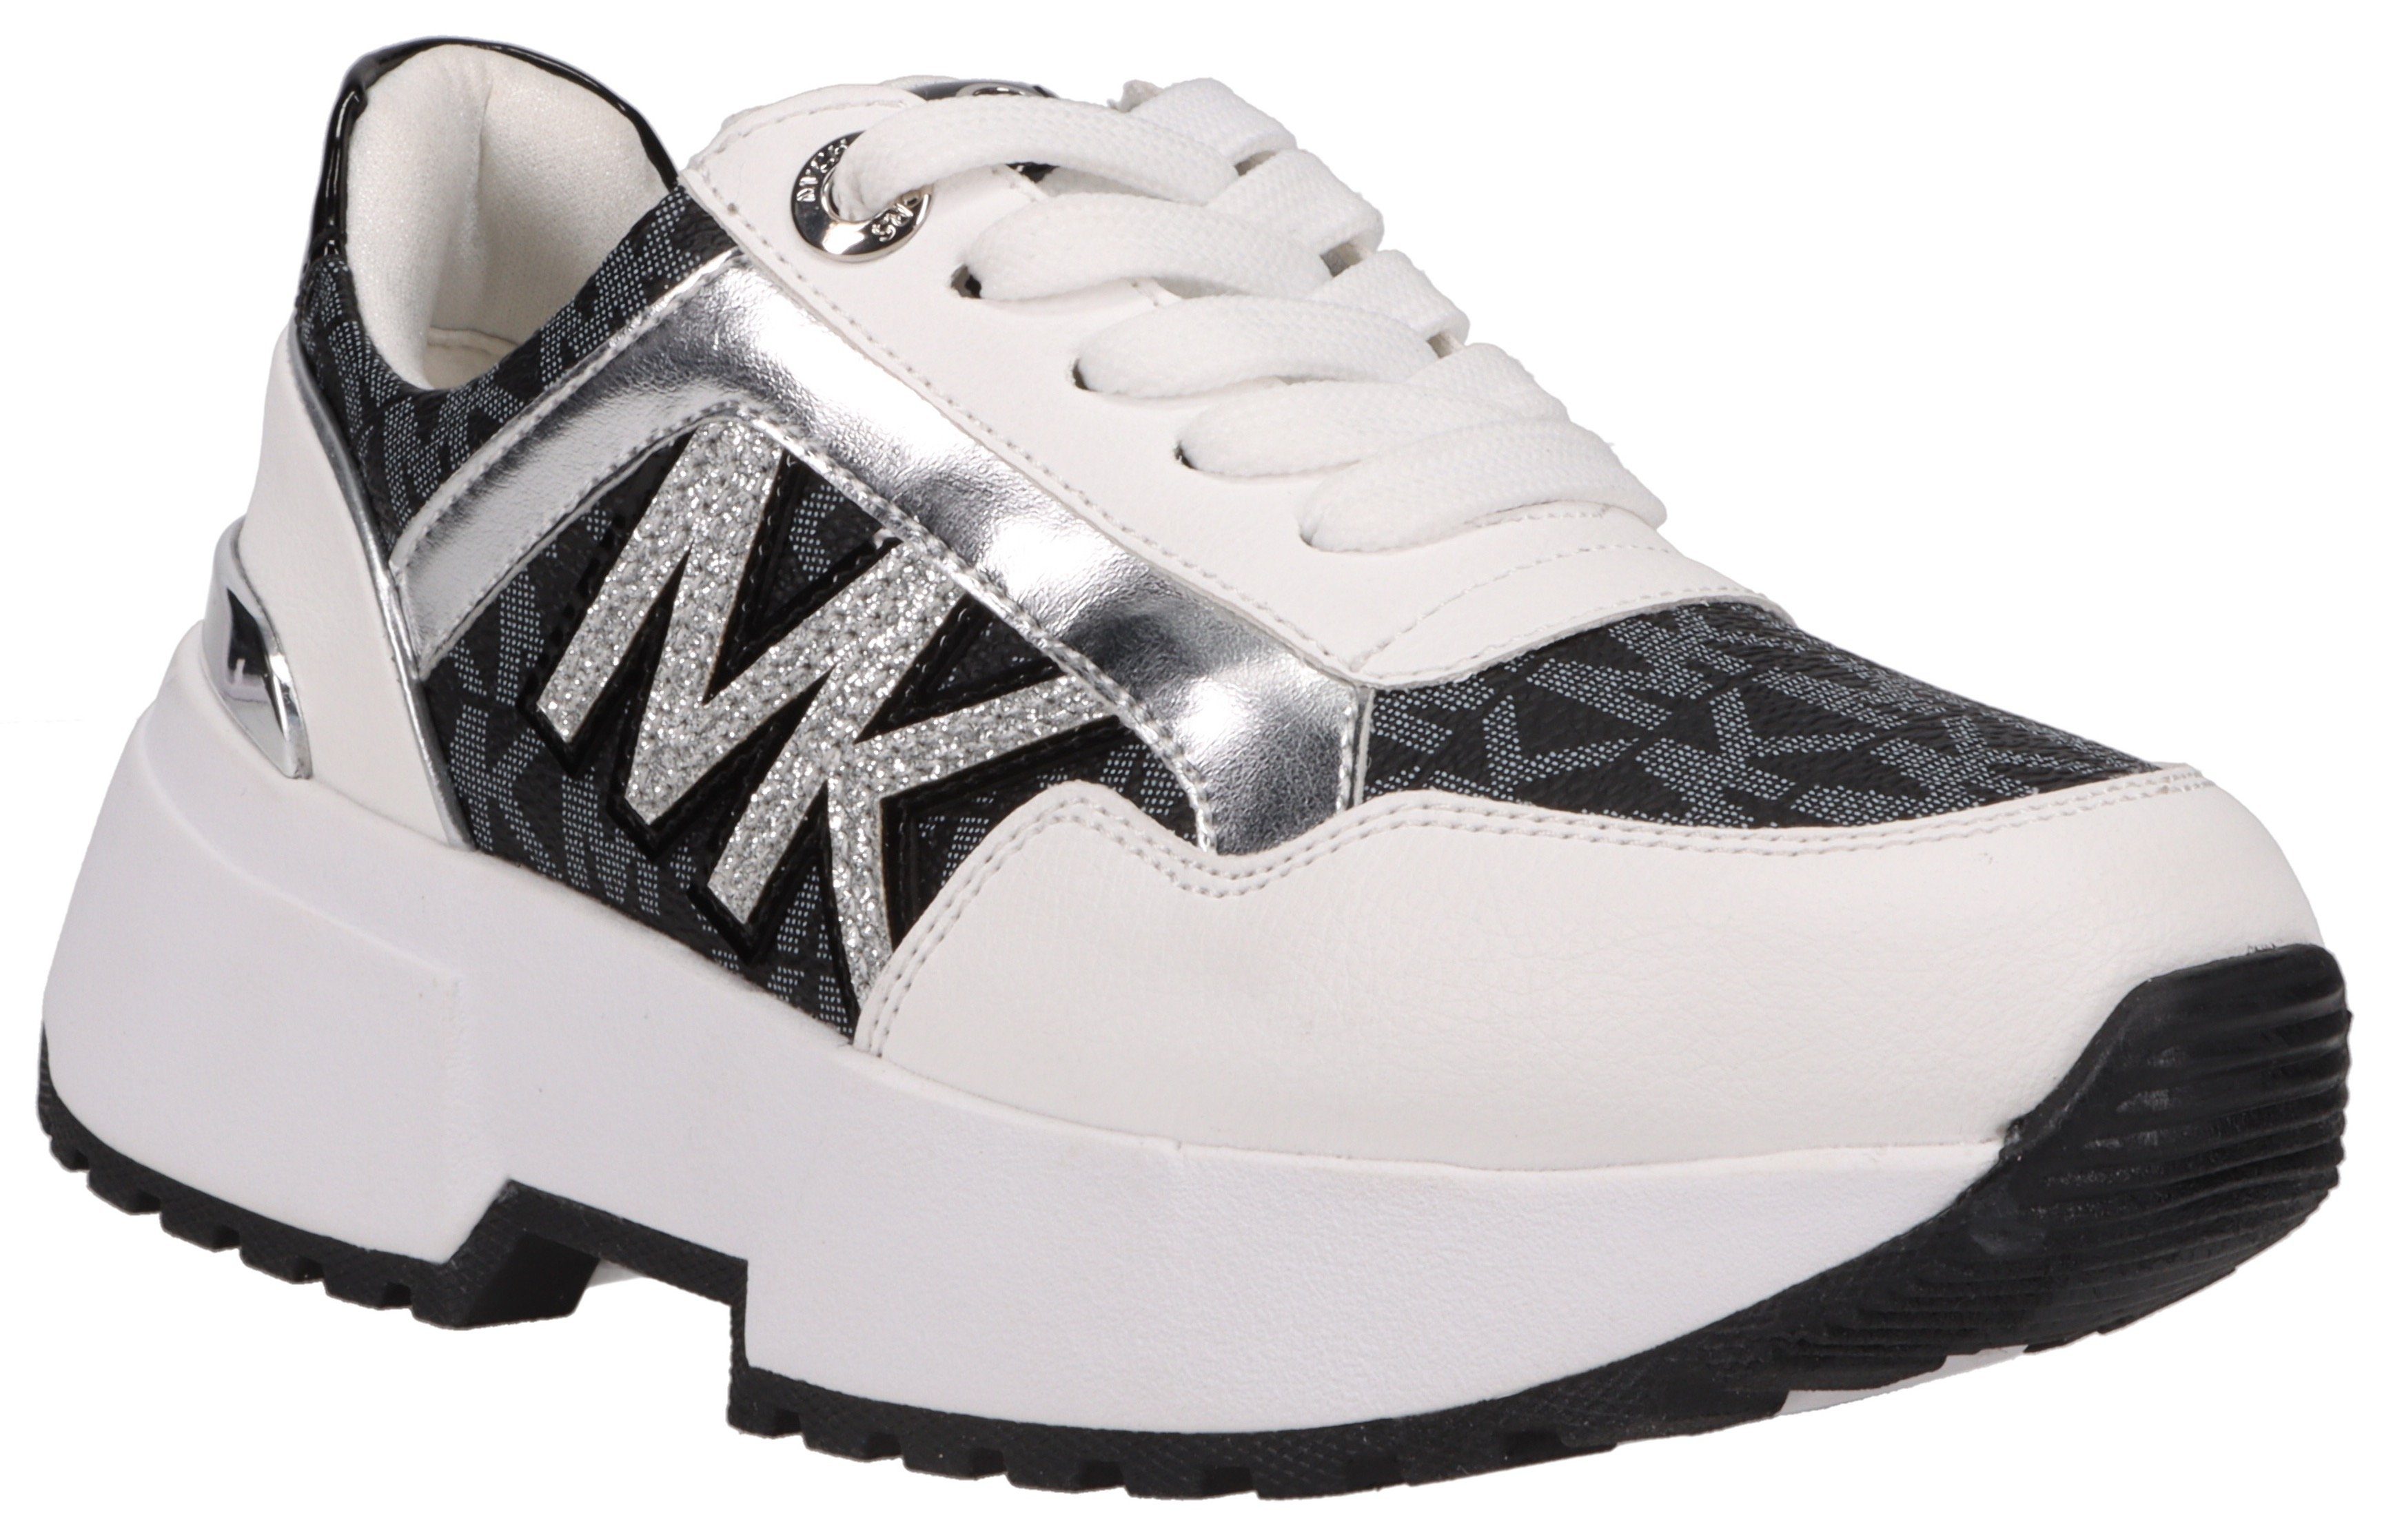 mit KIDS Plateausneaker Sneaker Chunky-Laufsohle KORS Maddy MICHAEL Cosmo